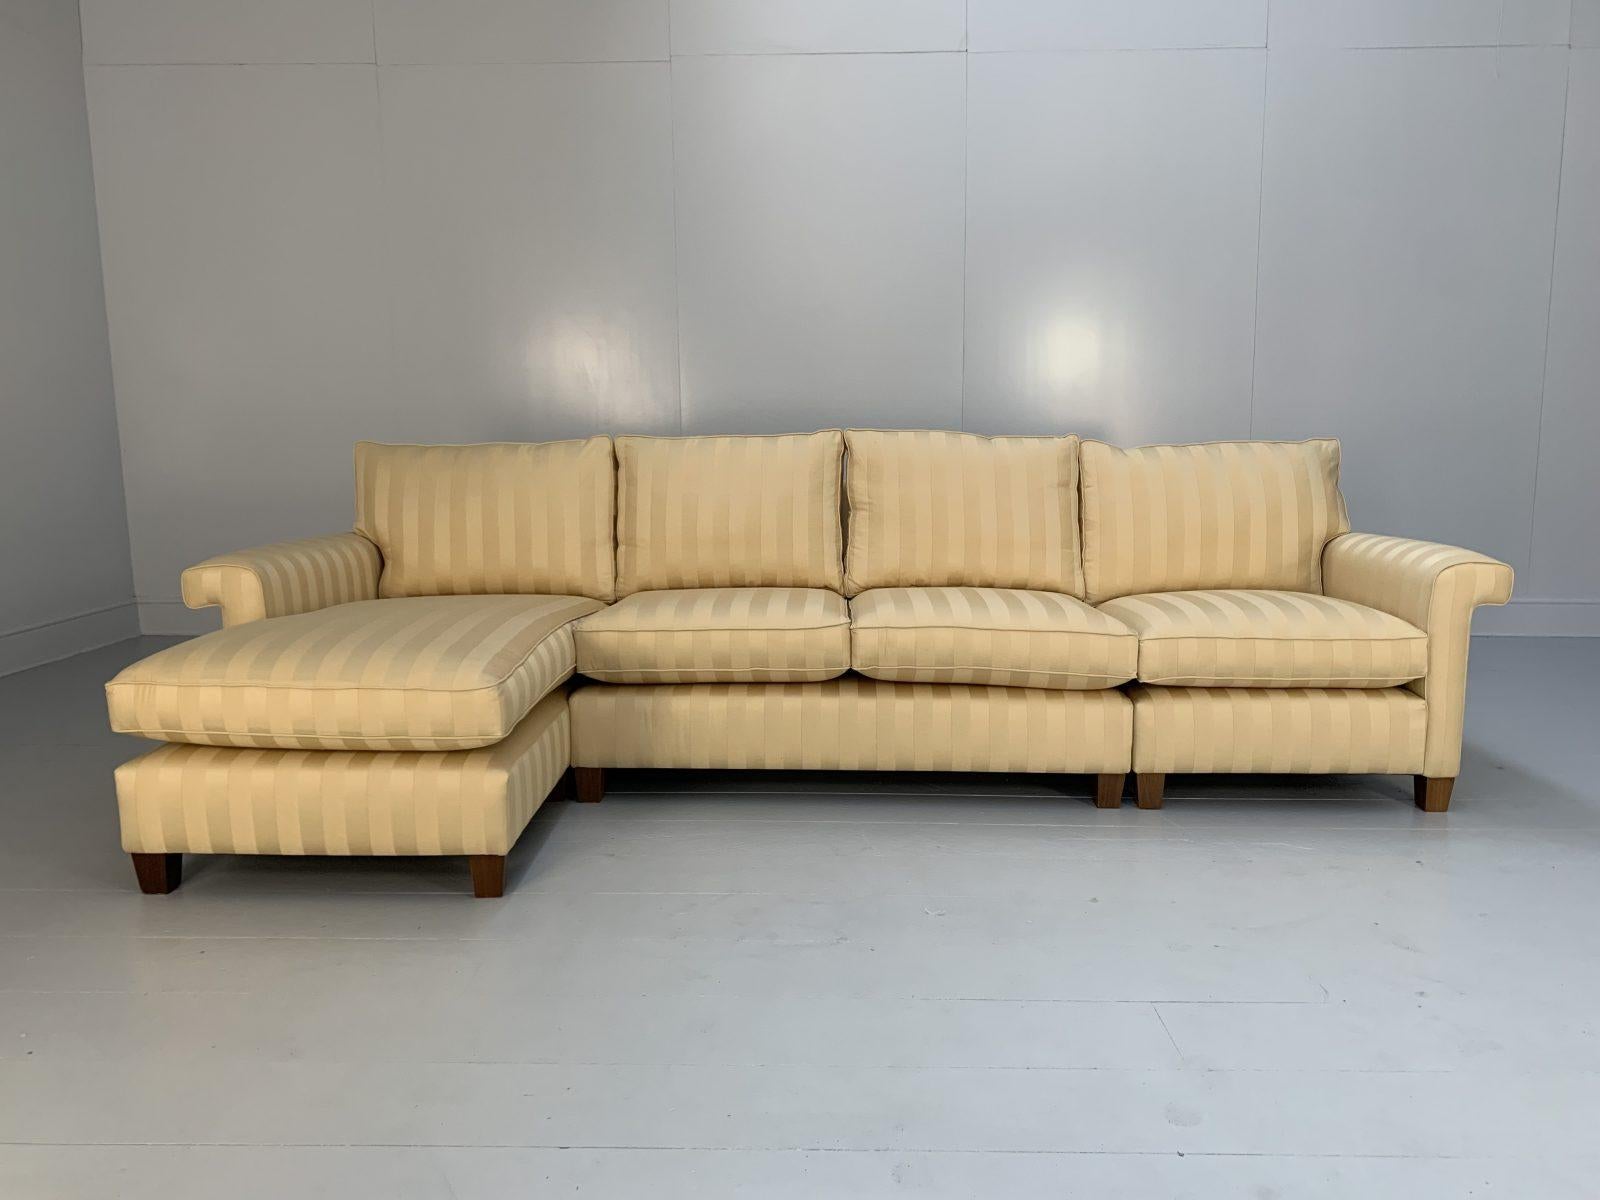 Hello Friends, and welcome to another unmissable offering from Lord Browns Furniture, the UK’s premier resource for fine Sofas and Chairs.

On offer on this occasion is a superb, majestic Duresta “Haywood” Cushion-Back 4-Seat L-Shape Sectional Sofa